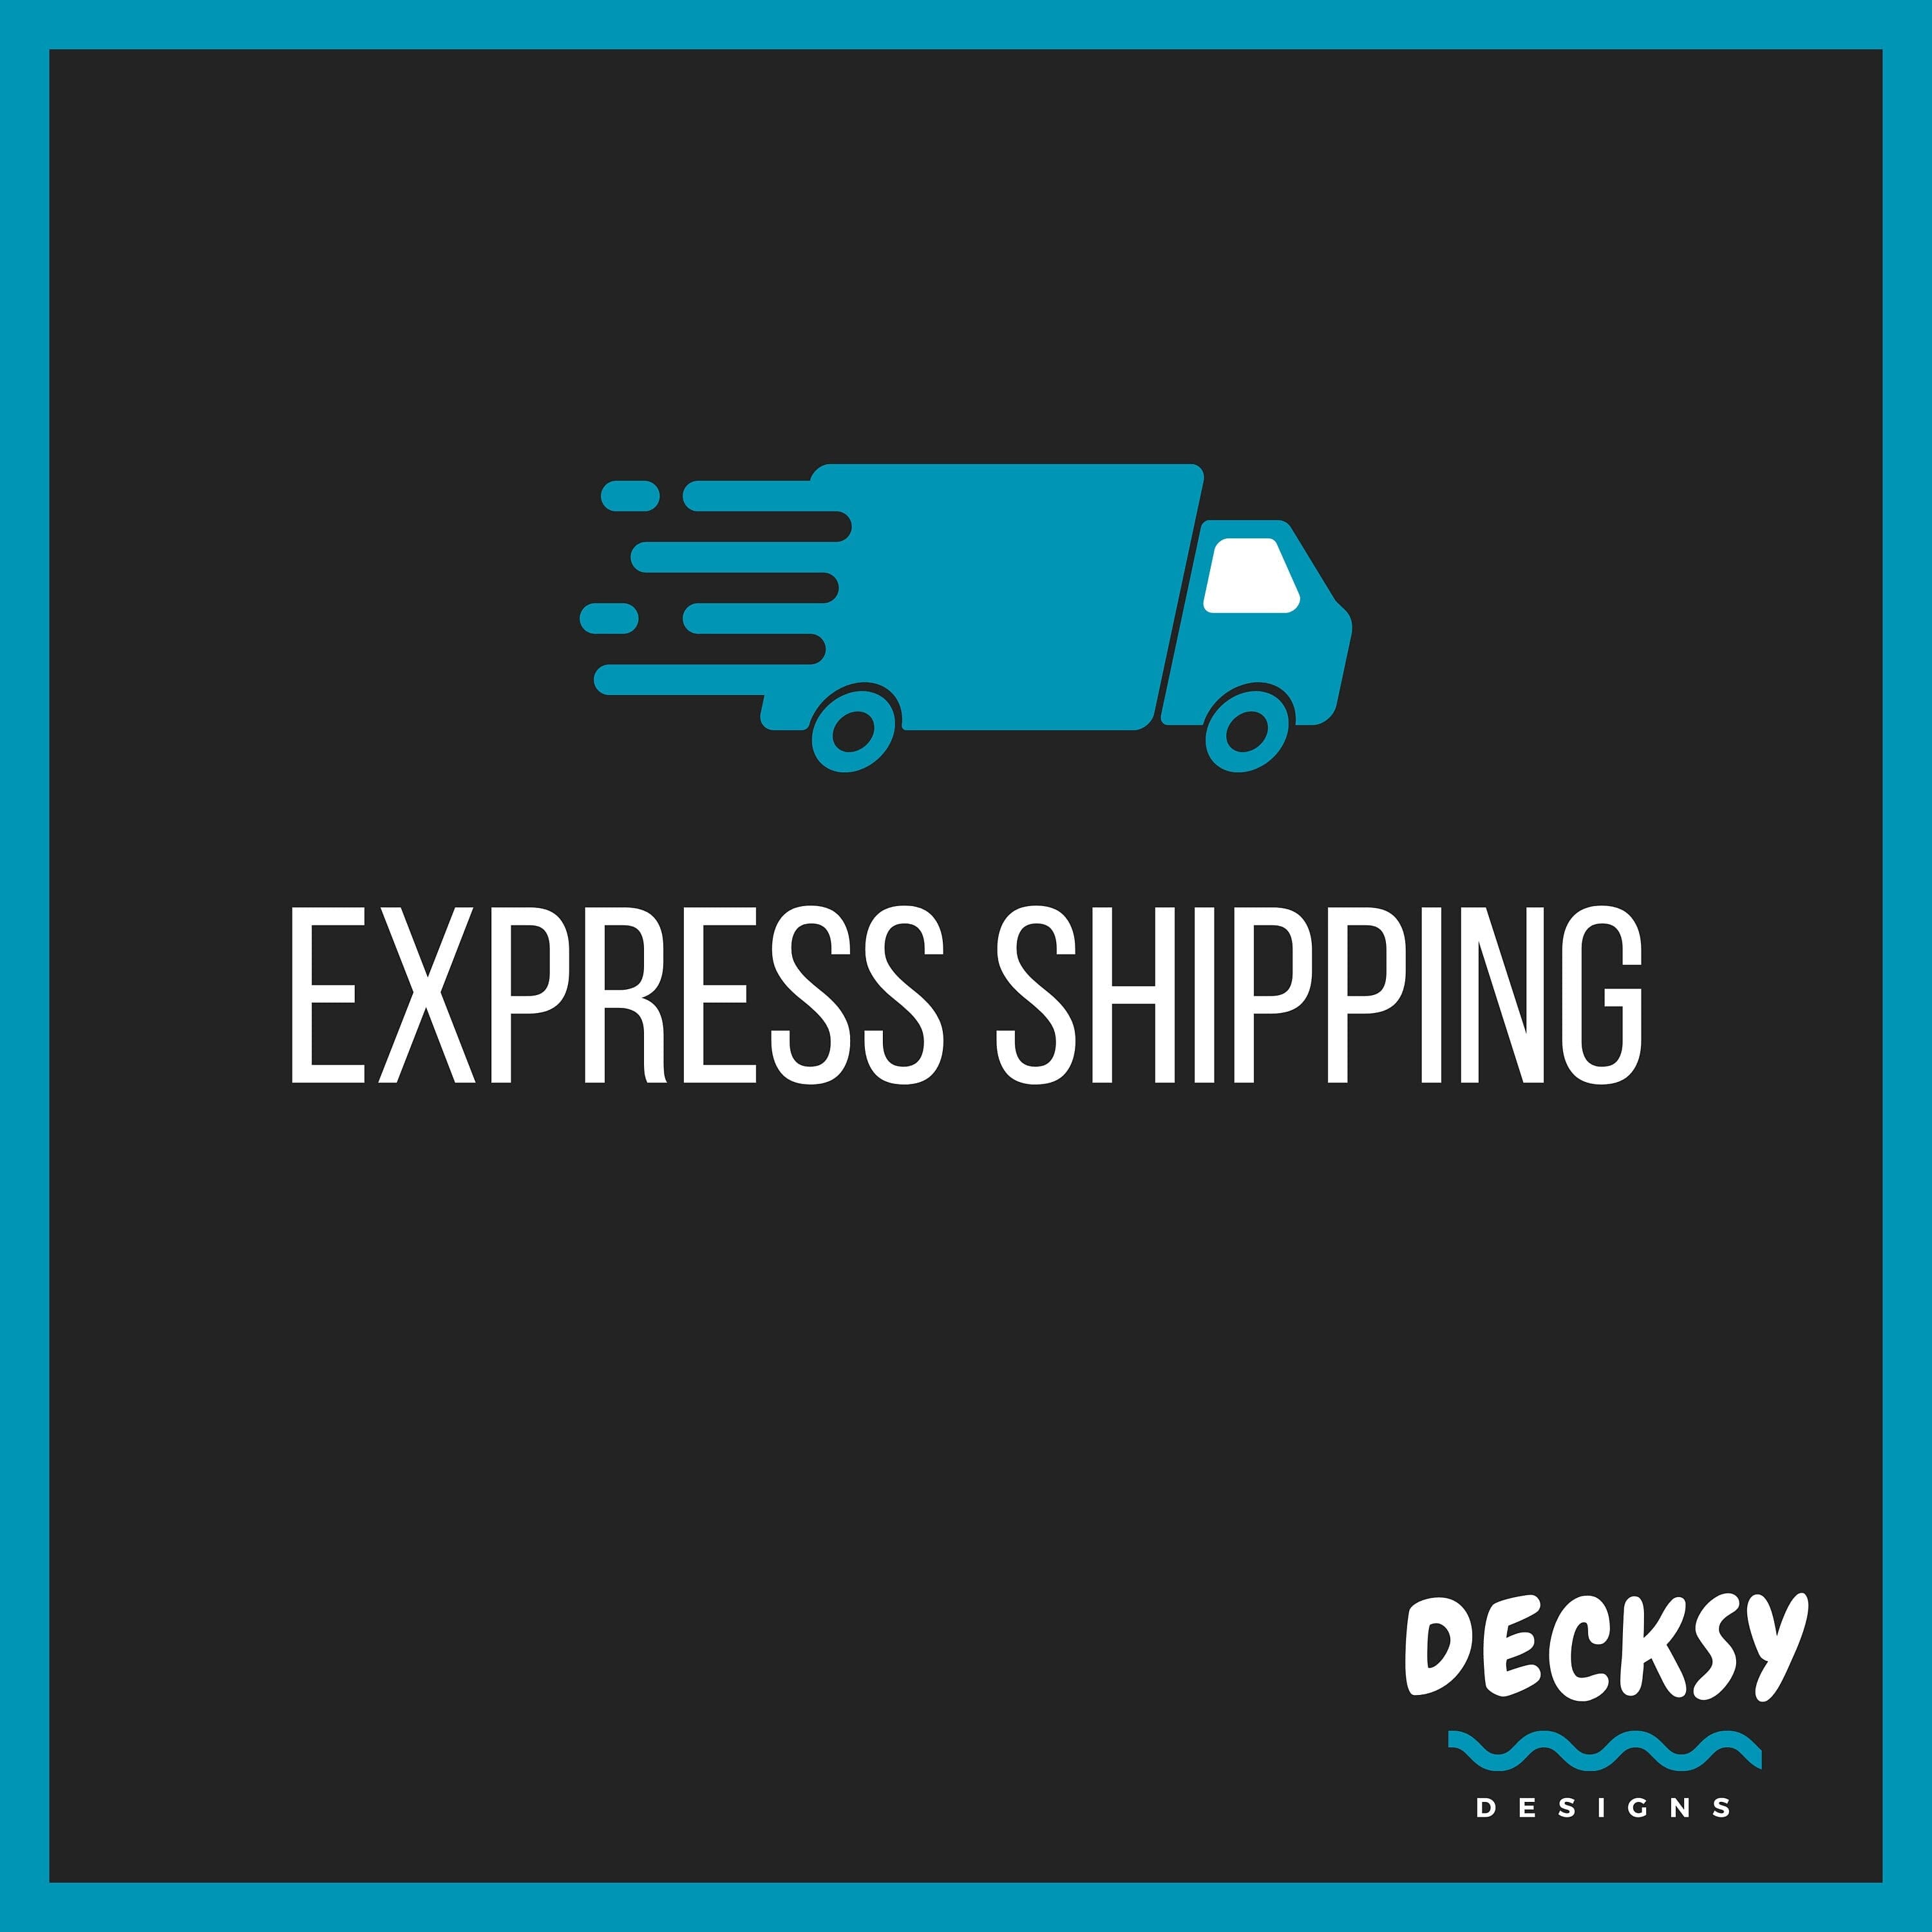 Express Post Shipping Upgrade Clothing:Gender-Neutral Adult Clothing:Tops & Tees:T-shirts DecksyDesigns 